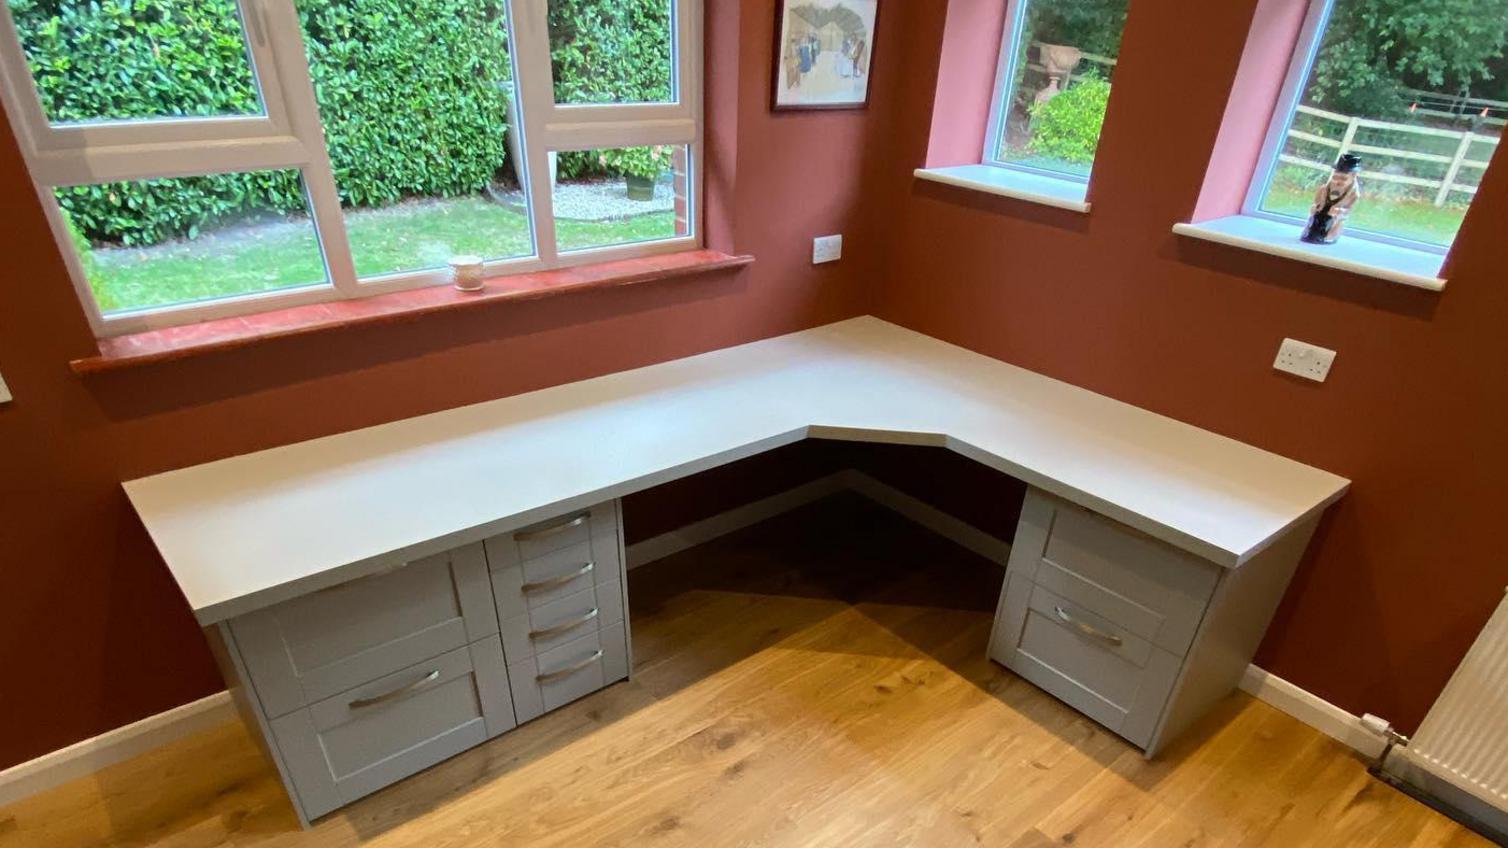 Home office desk from @aspectshome using Fairford Pebble grey kitchen cabinets and d-shaped bar handles in silver.